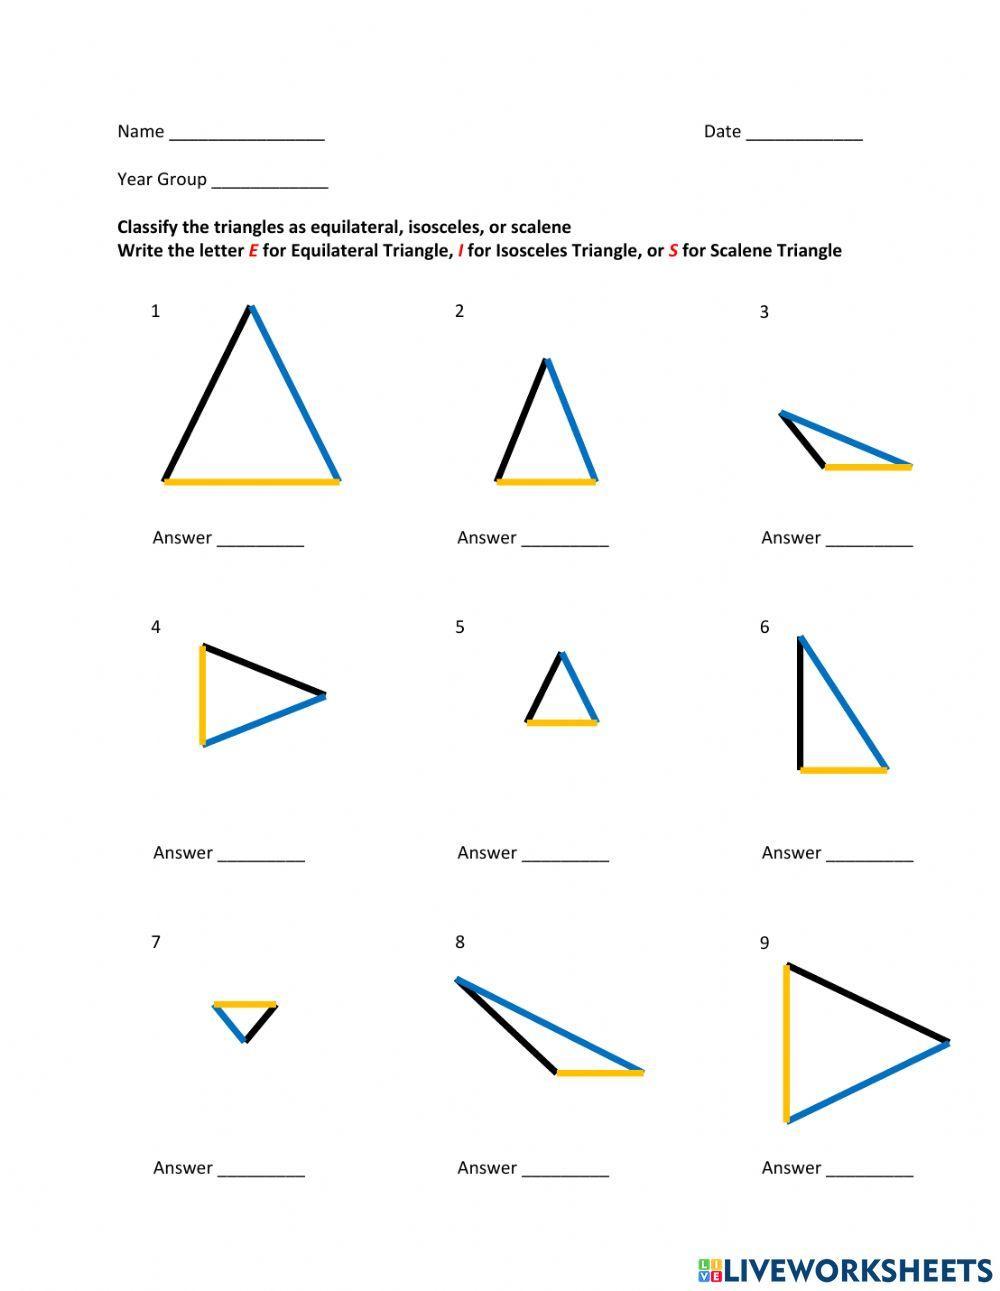 Classify Triangles by their Sides